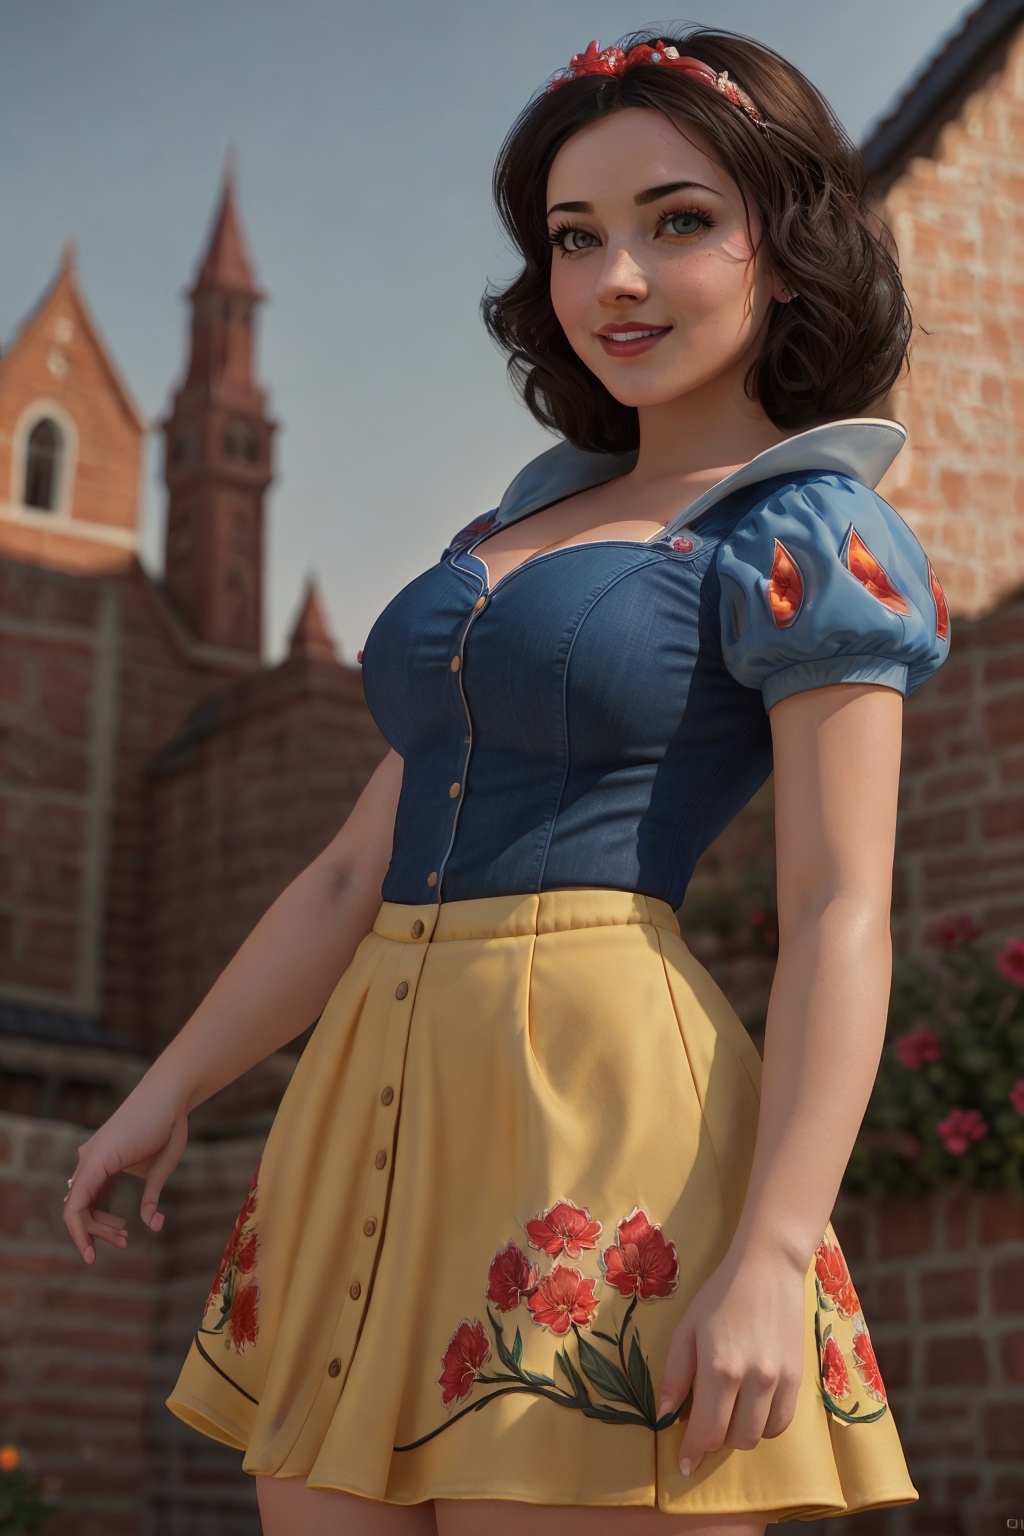 Snow White Disney Princess by YeiyeiArt image by ngsm000